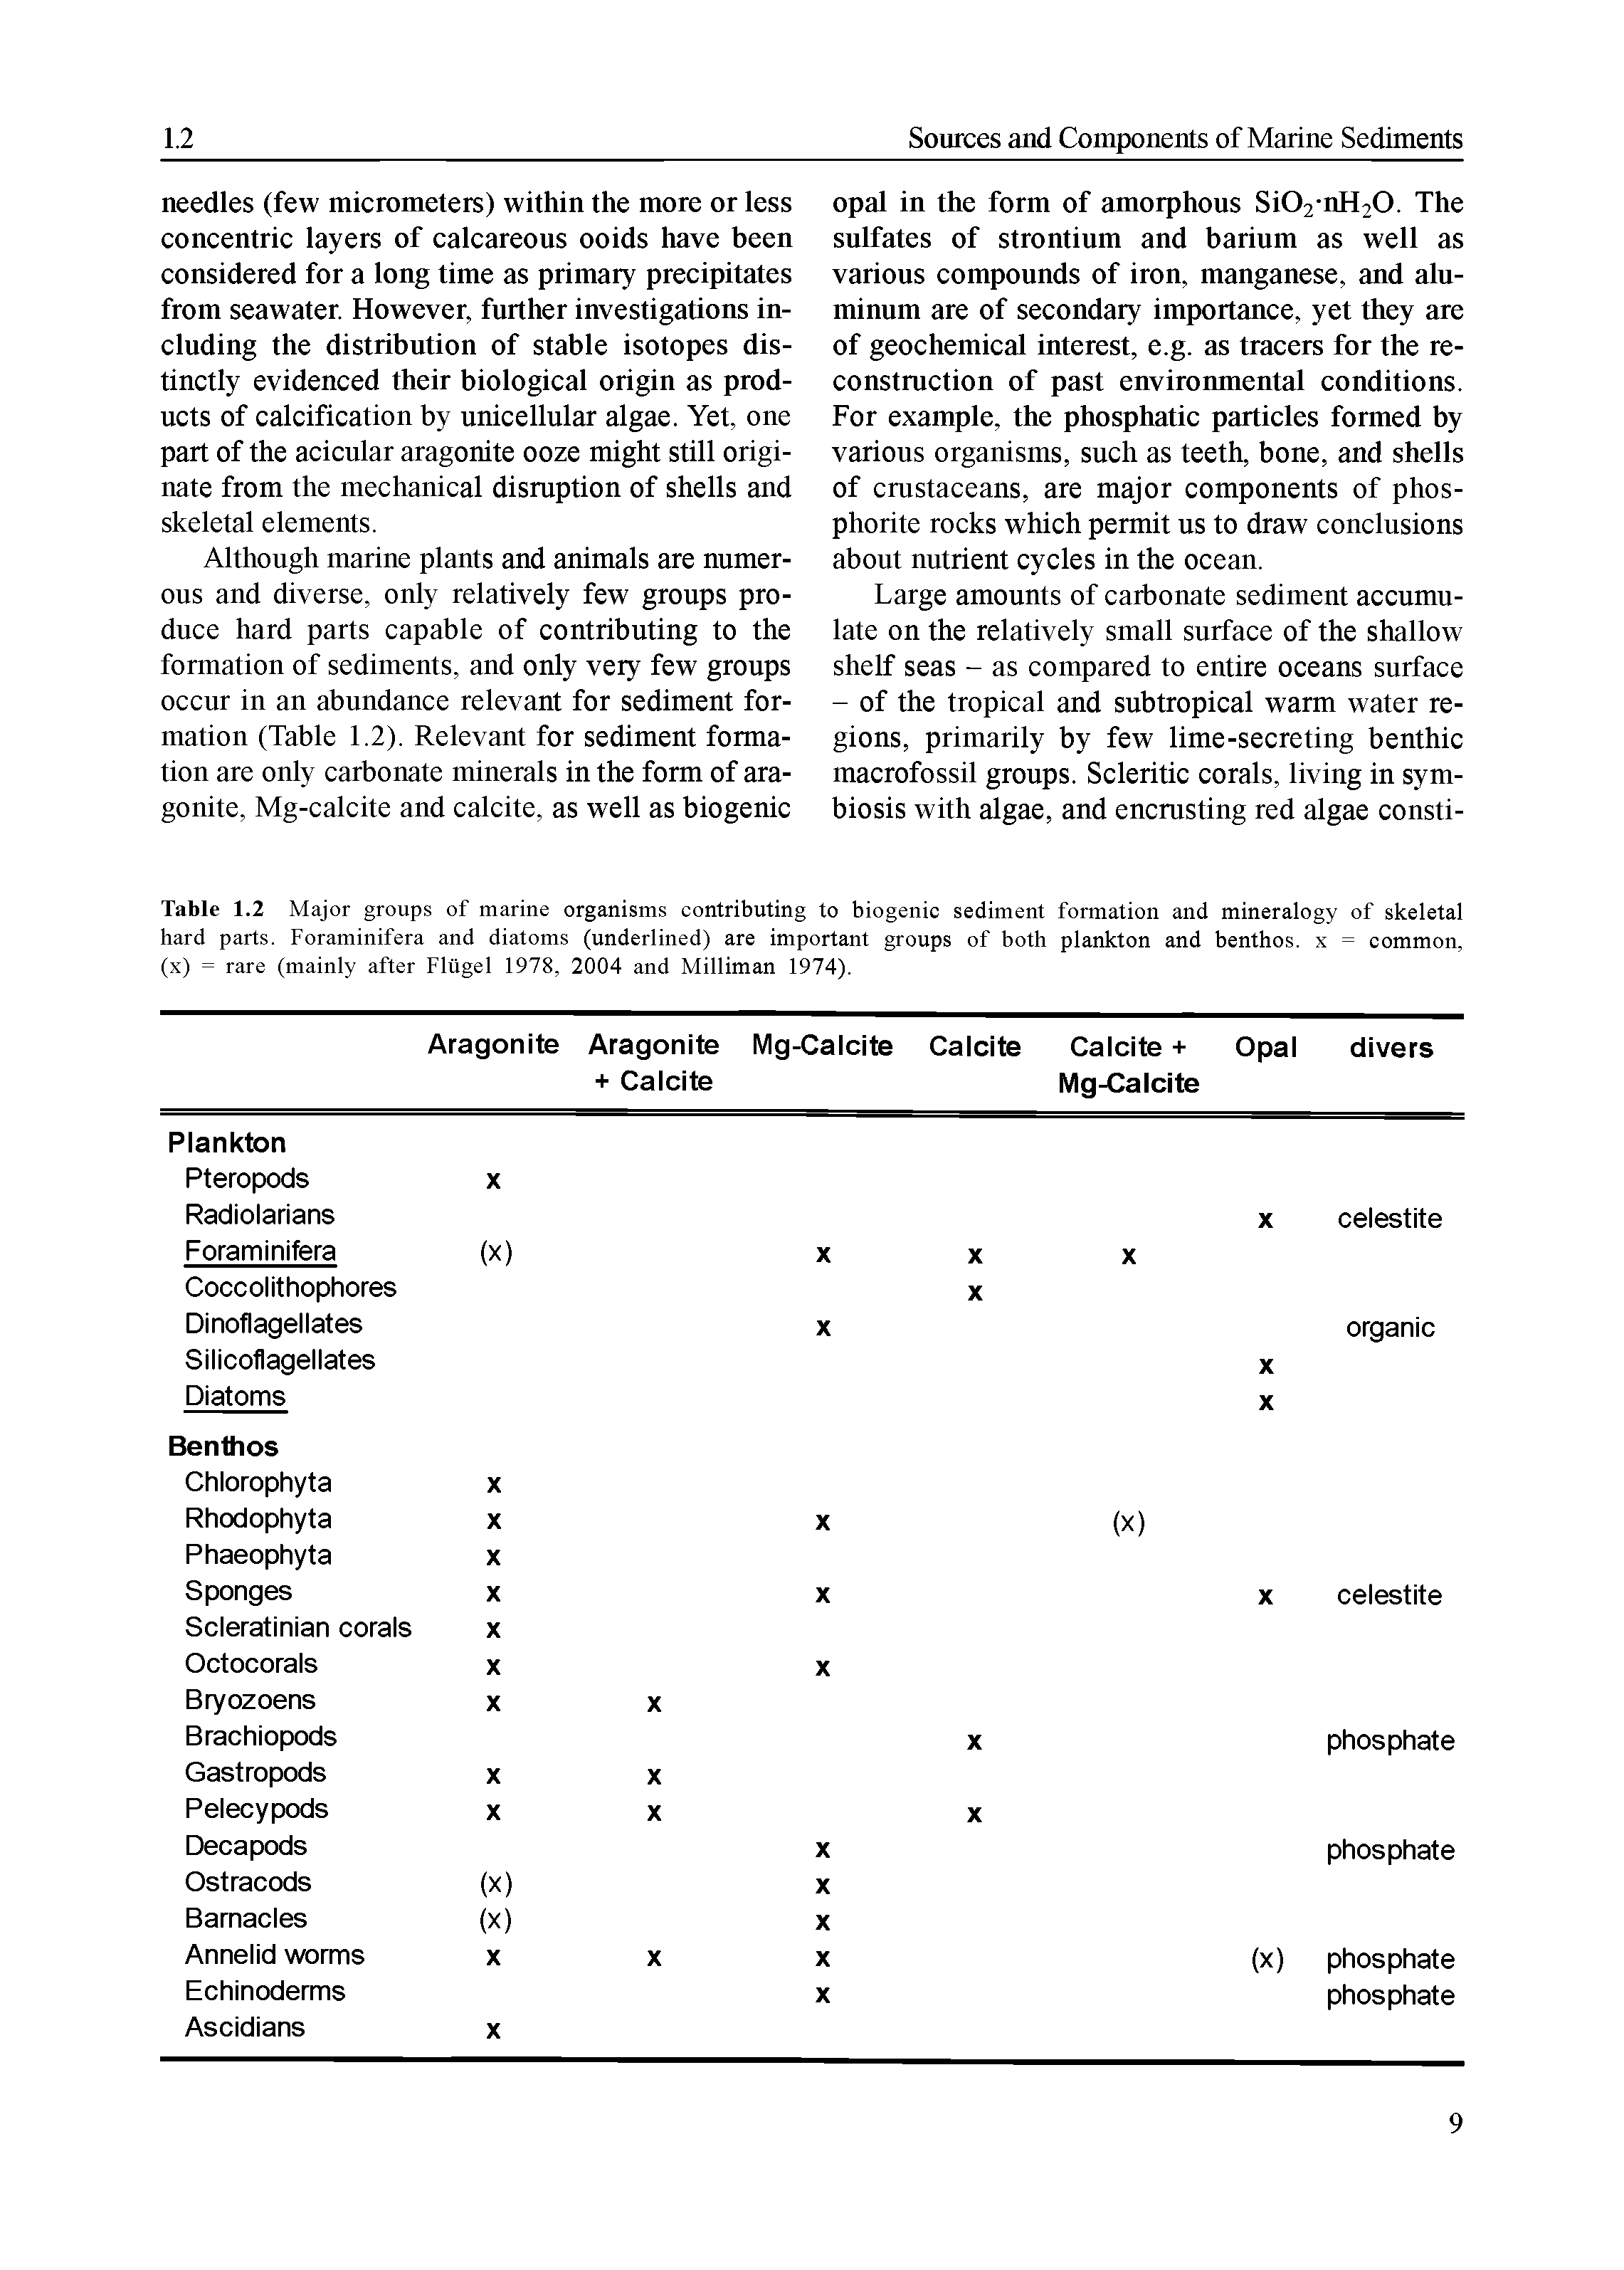 Table 1.2 Major groups of marine organisms contributing to biogenic sediment formation and mineralogy of skeletal hard parts. Foraminifera and diatoms (underlined) are important groups of both plankton and benthos, x = common, (x) = rare (mainly after Fliigel 1978, 2004 and Milliman 1974).